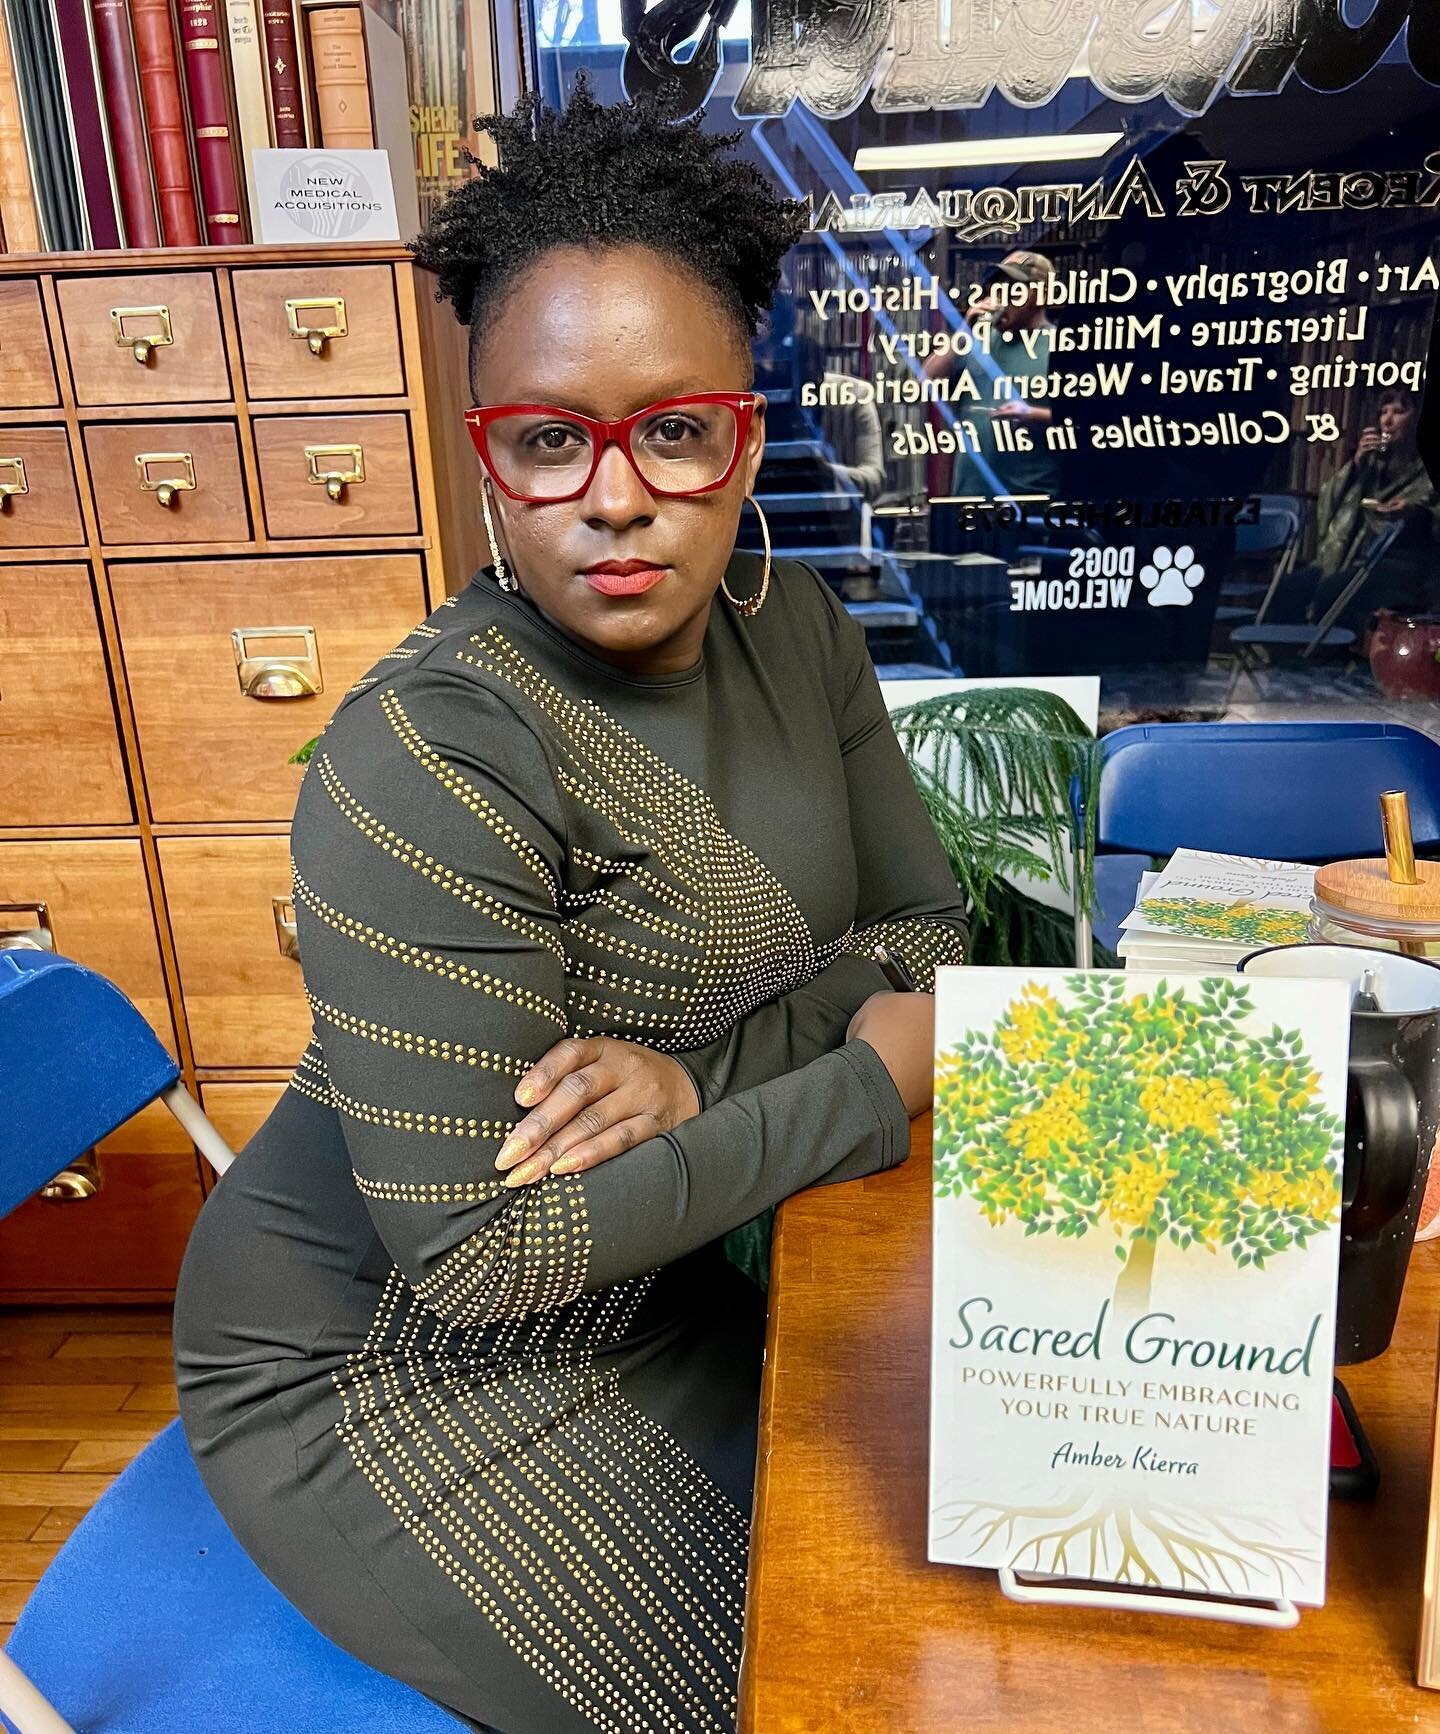 I did it, I had a wildly successful book launch event. The magic in my heart is impalpable. 🙏🏿

Thank you @hermitage_bookshop for hosting my heart&rsquo;s work. 

#publishedauthor #blackauthors #disabledauthor #spokenwordpoetry #spokenwordartist